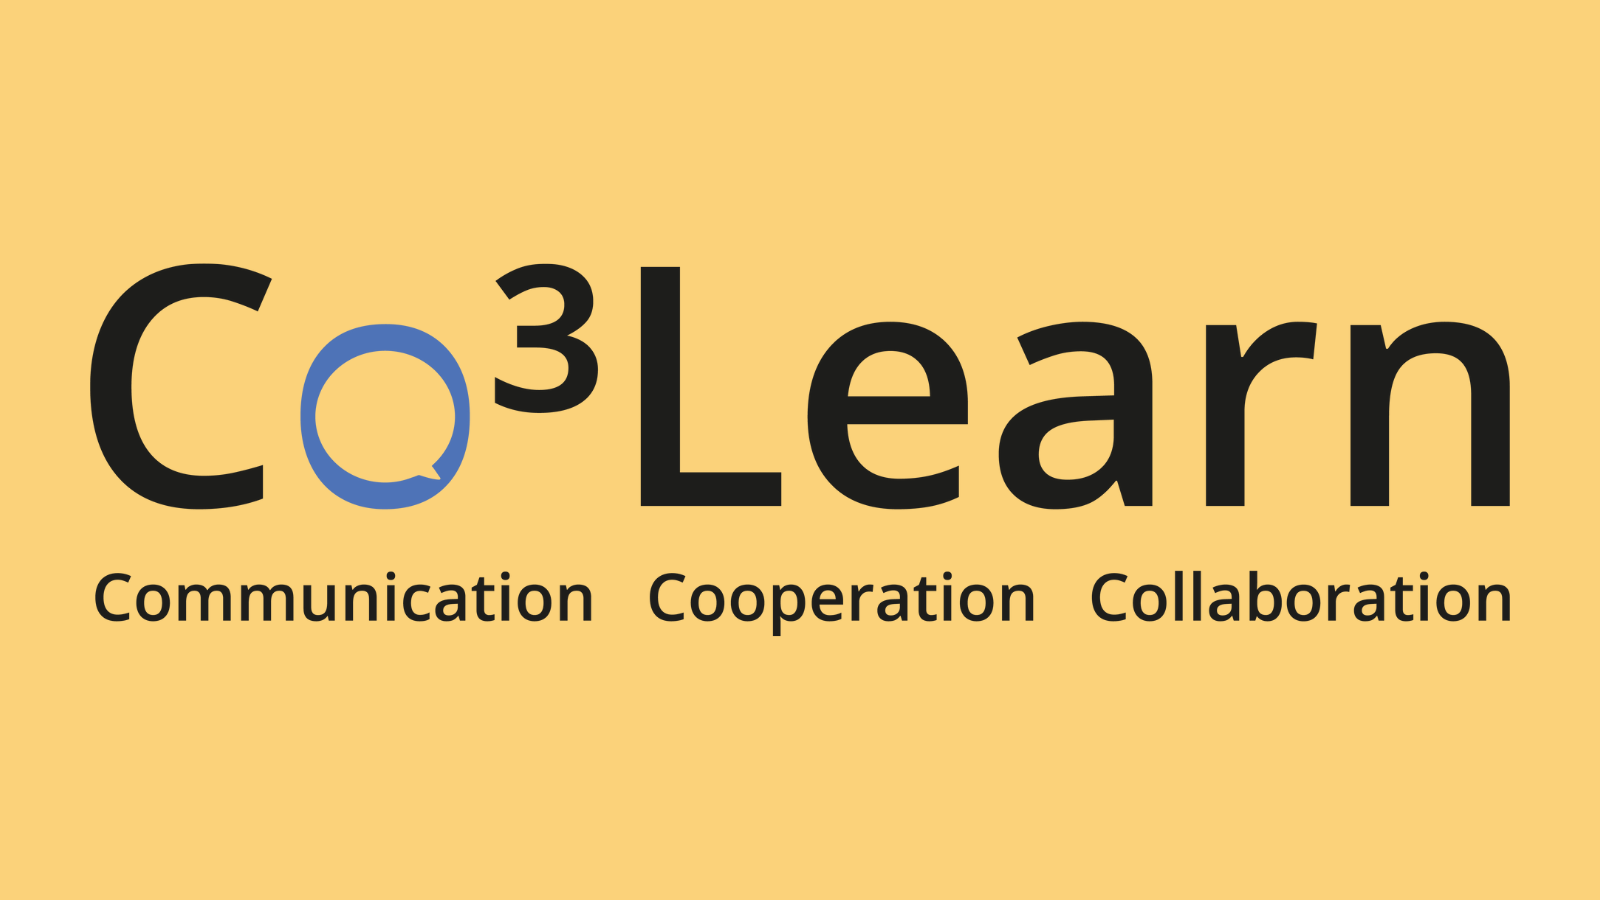 Logo: Co3 Learn Communication Cooperation Collaboration